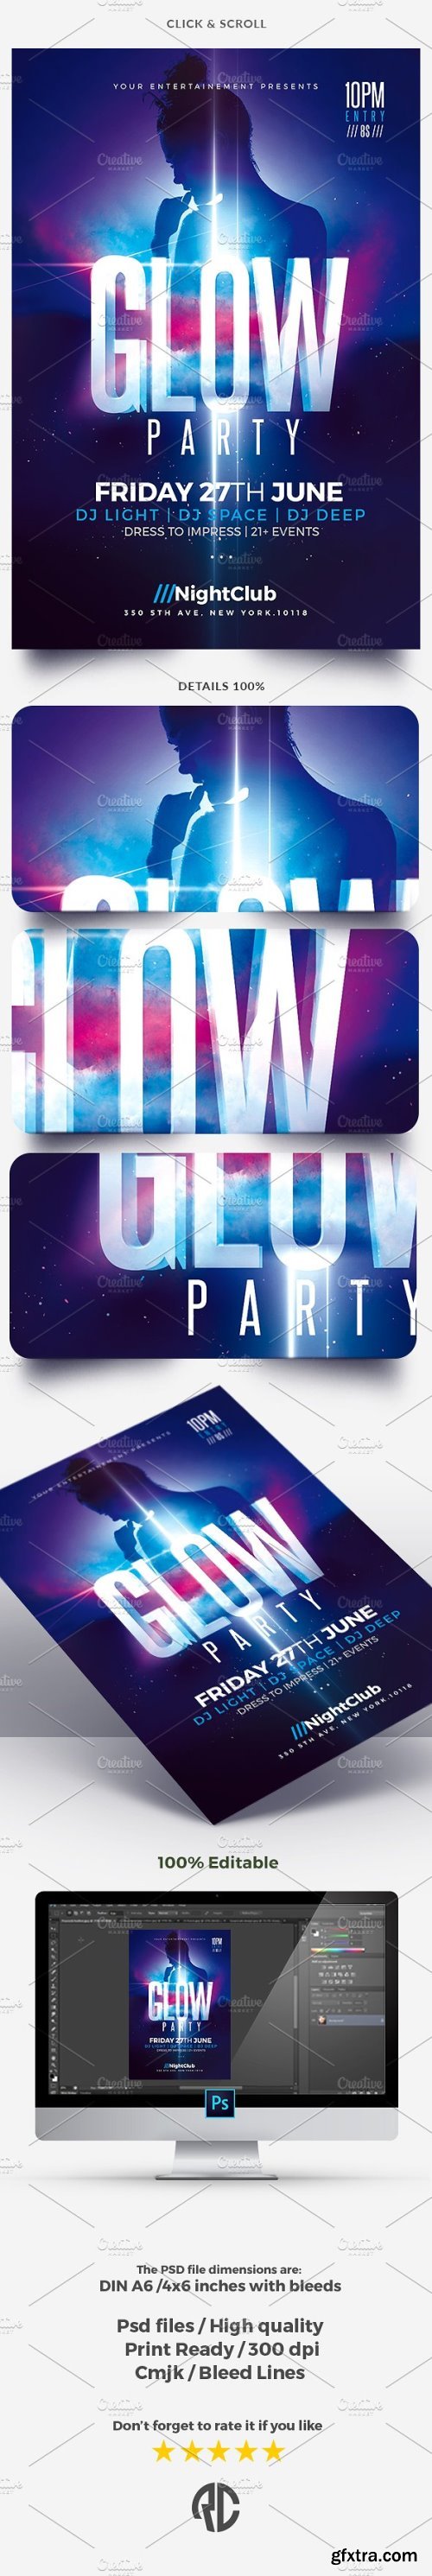 CM - Glow Party - Flyer Template 1569534